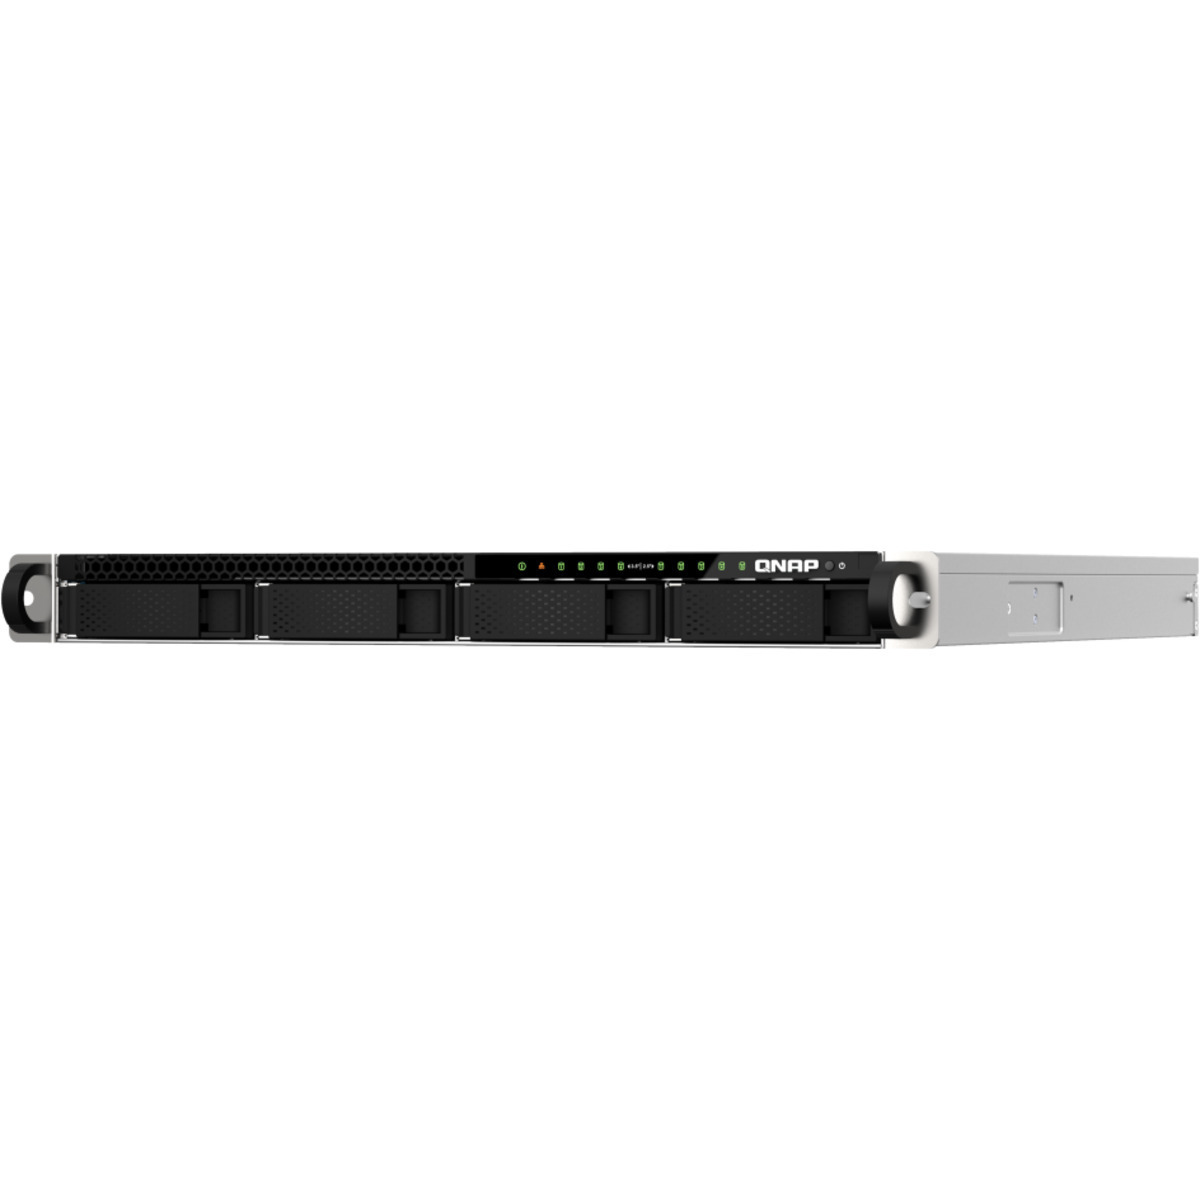 QNAP TS-h987XU-RP QuTS hero Edition 48tb 4-Bay RackMount Large Business / Enterprise NAS - Network Attached Storage Device 4x12tb Seagate IronWolf Pro ST12000NT001 3.5 7200rpm SATA 6Gb/s HDD NAS Class Drives Installed - Burn-In Tested - ON SALE TS-h987XU-RP QuTS hero Edition